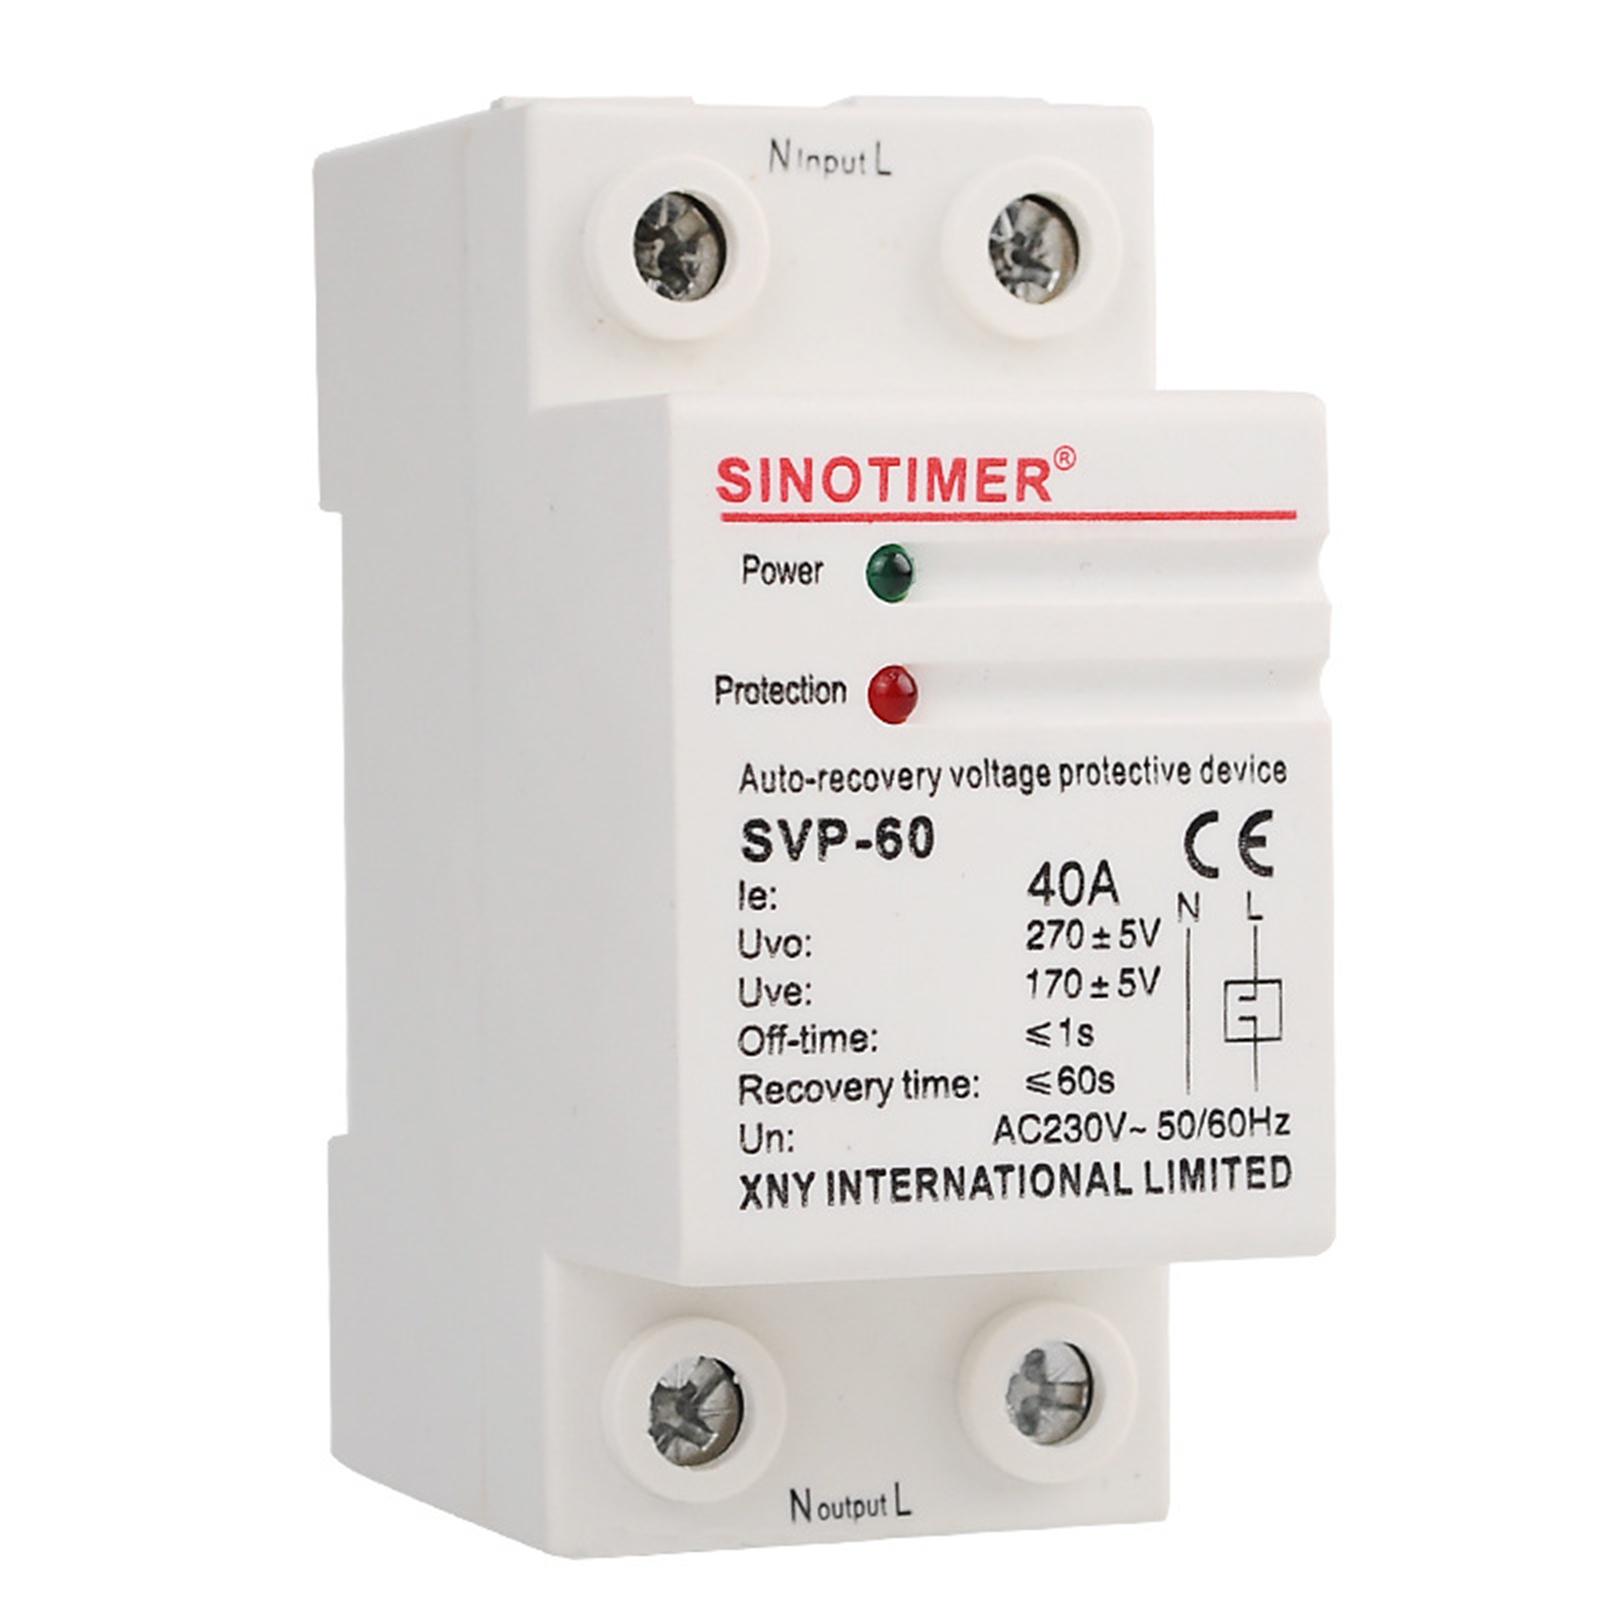 Svp-60 220v Household Under Voltage Protector Device Reliable Electronic Components Automatic Self-resetting Protector